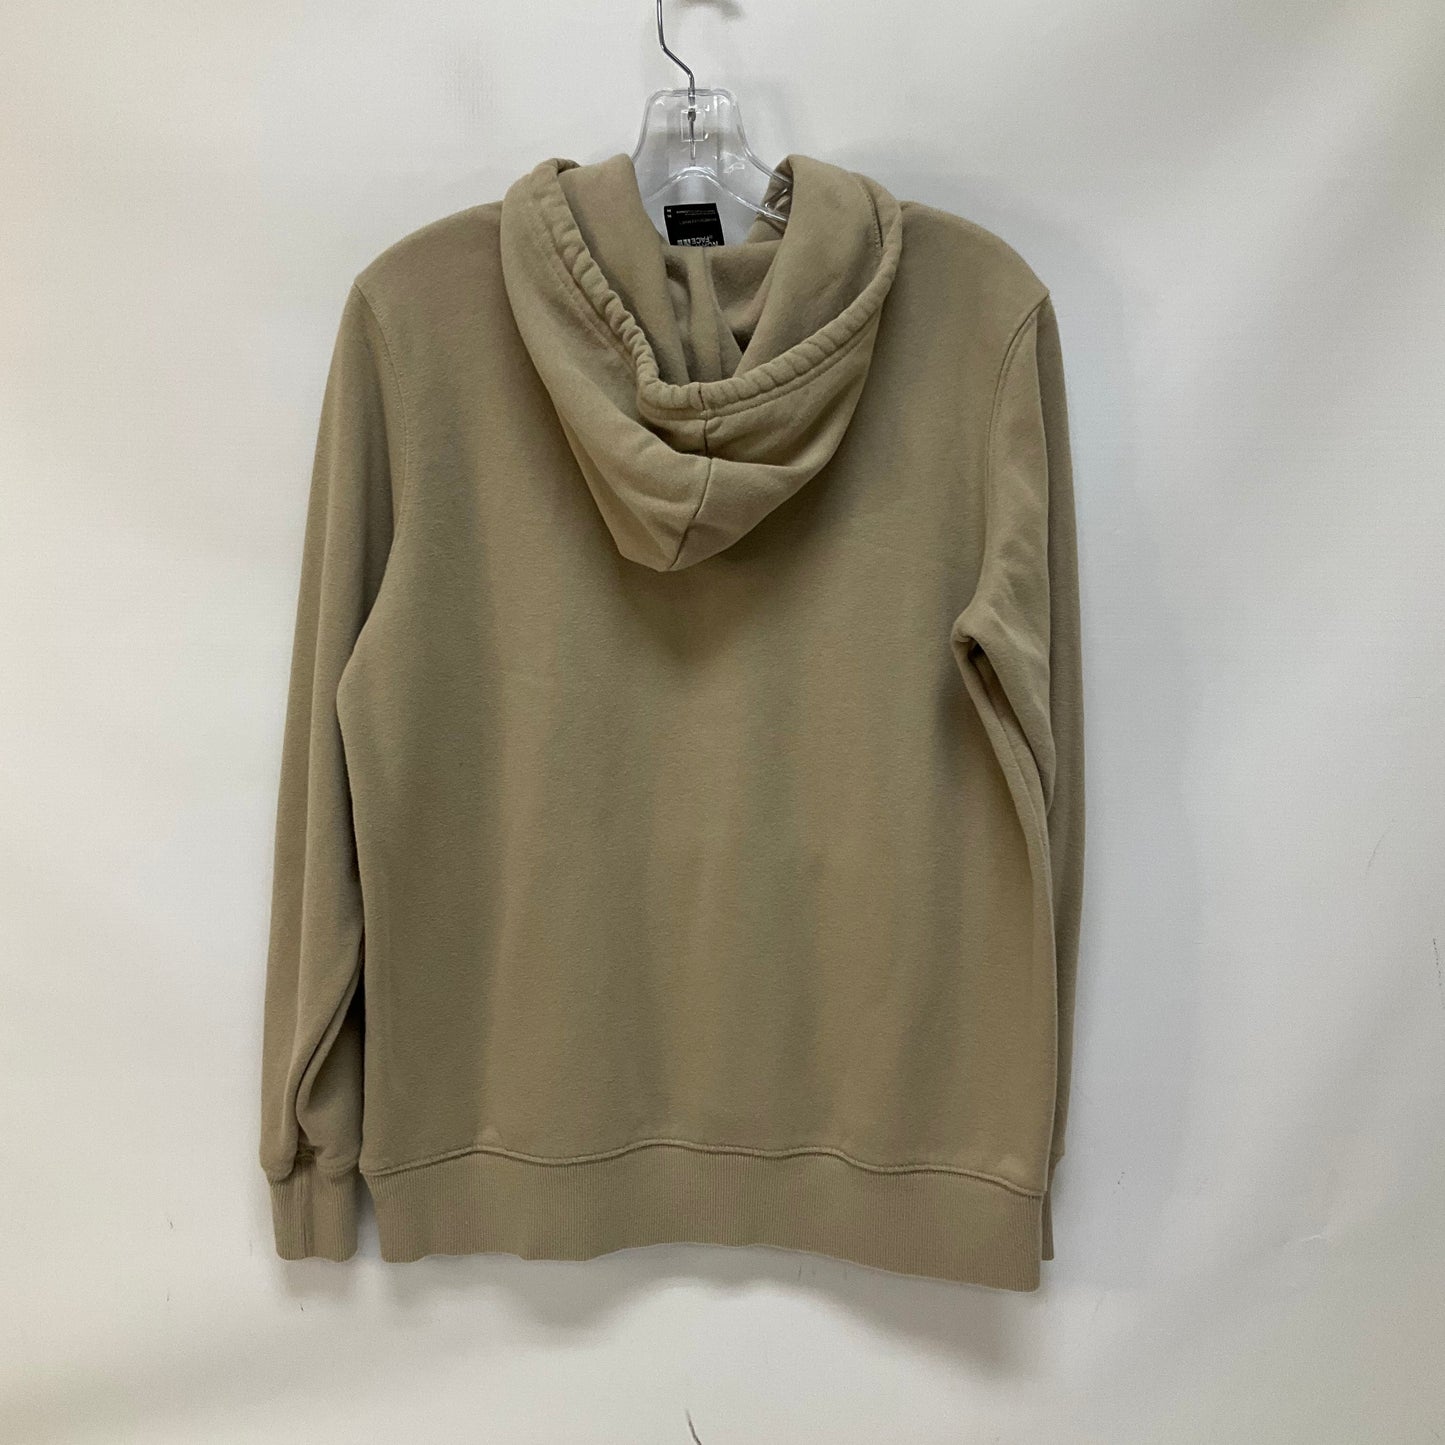 Tan Athletic Top Long Sleeve Collar The North Face, Size M